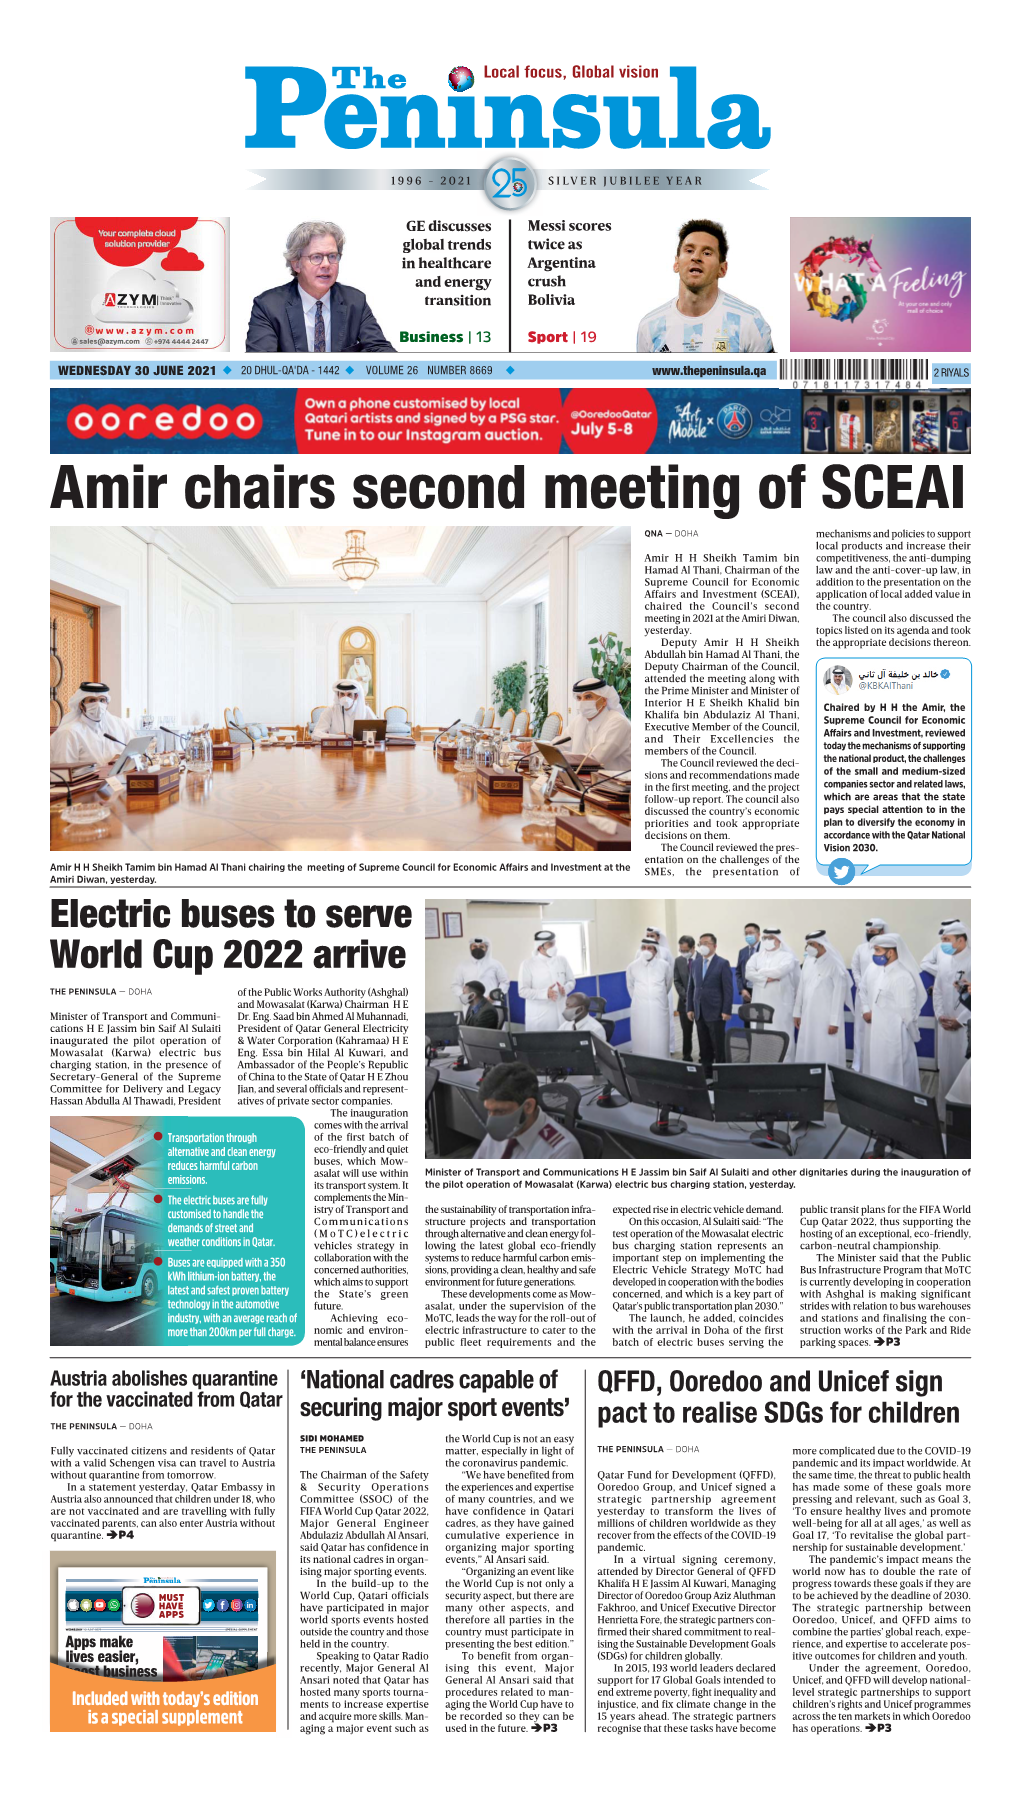 Amir Chairs Second Meeting of SCEAI